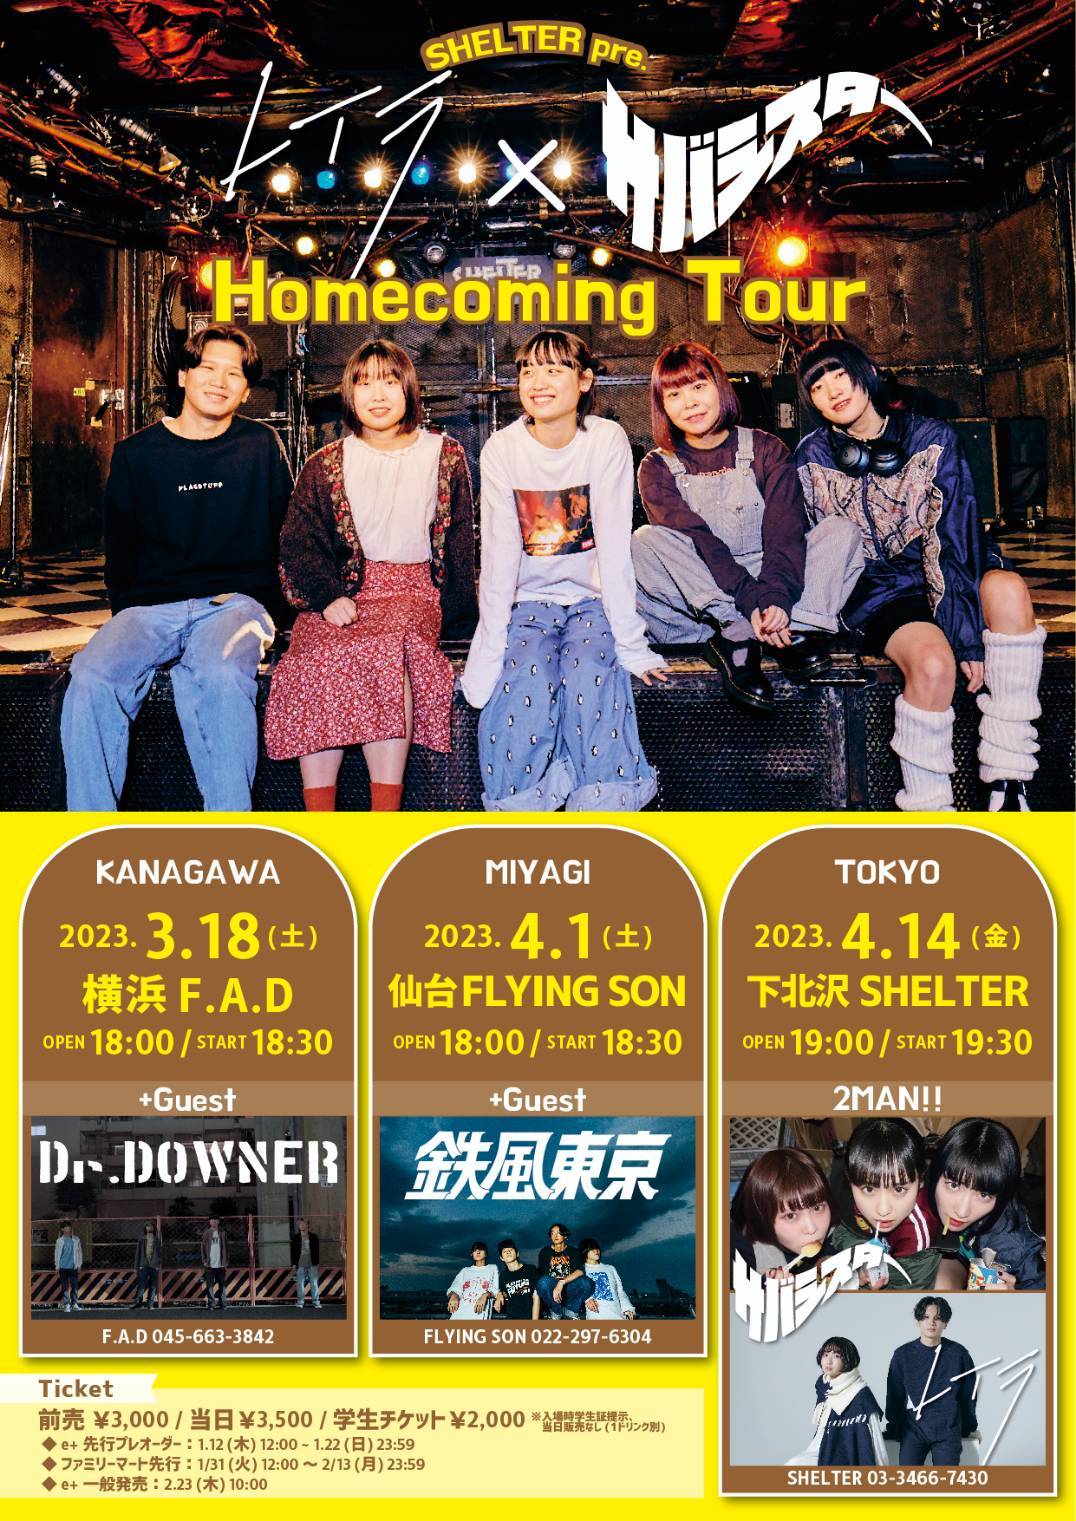 SHELTER presents. レイラ × サバシスター “ Homecoming Tour "